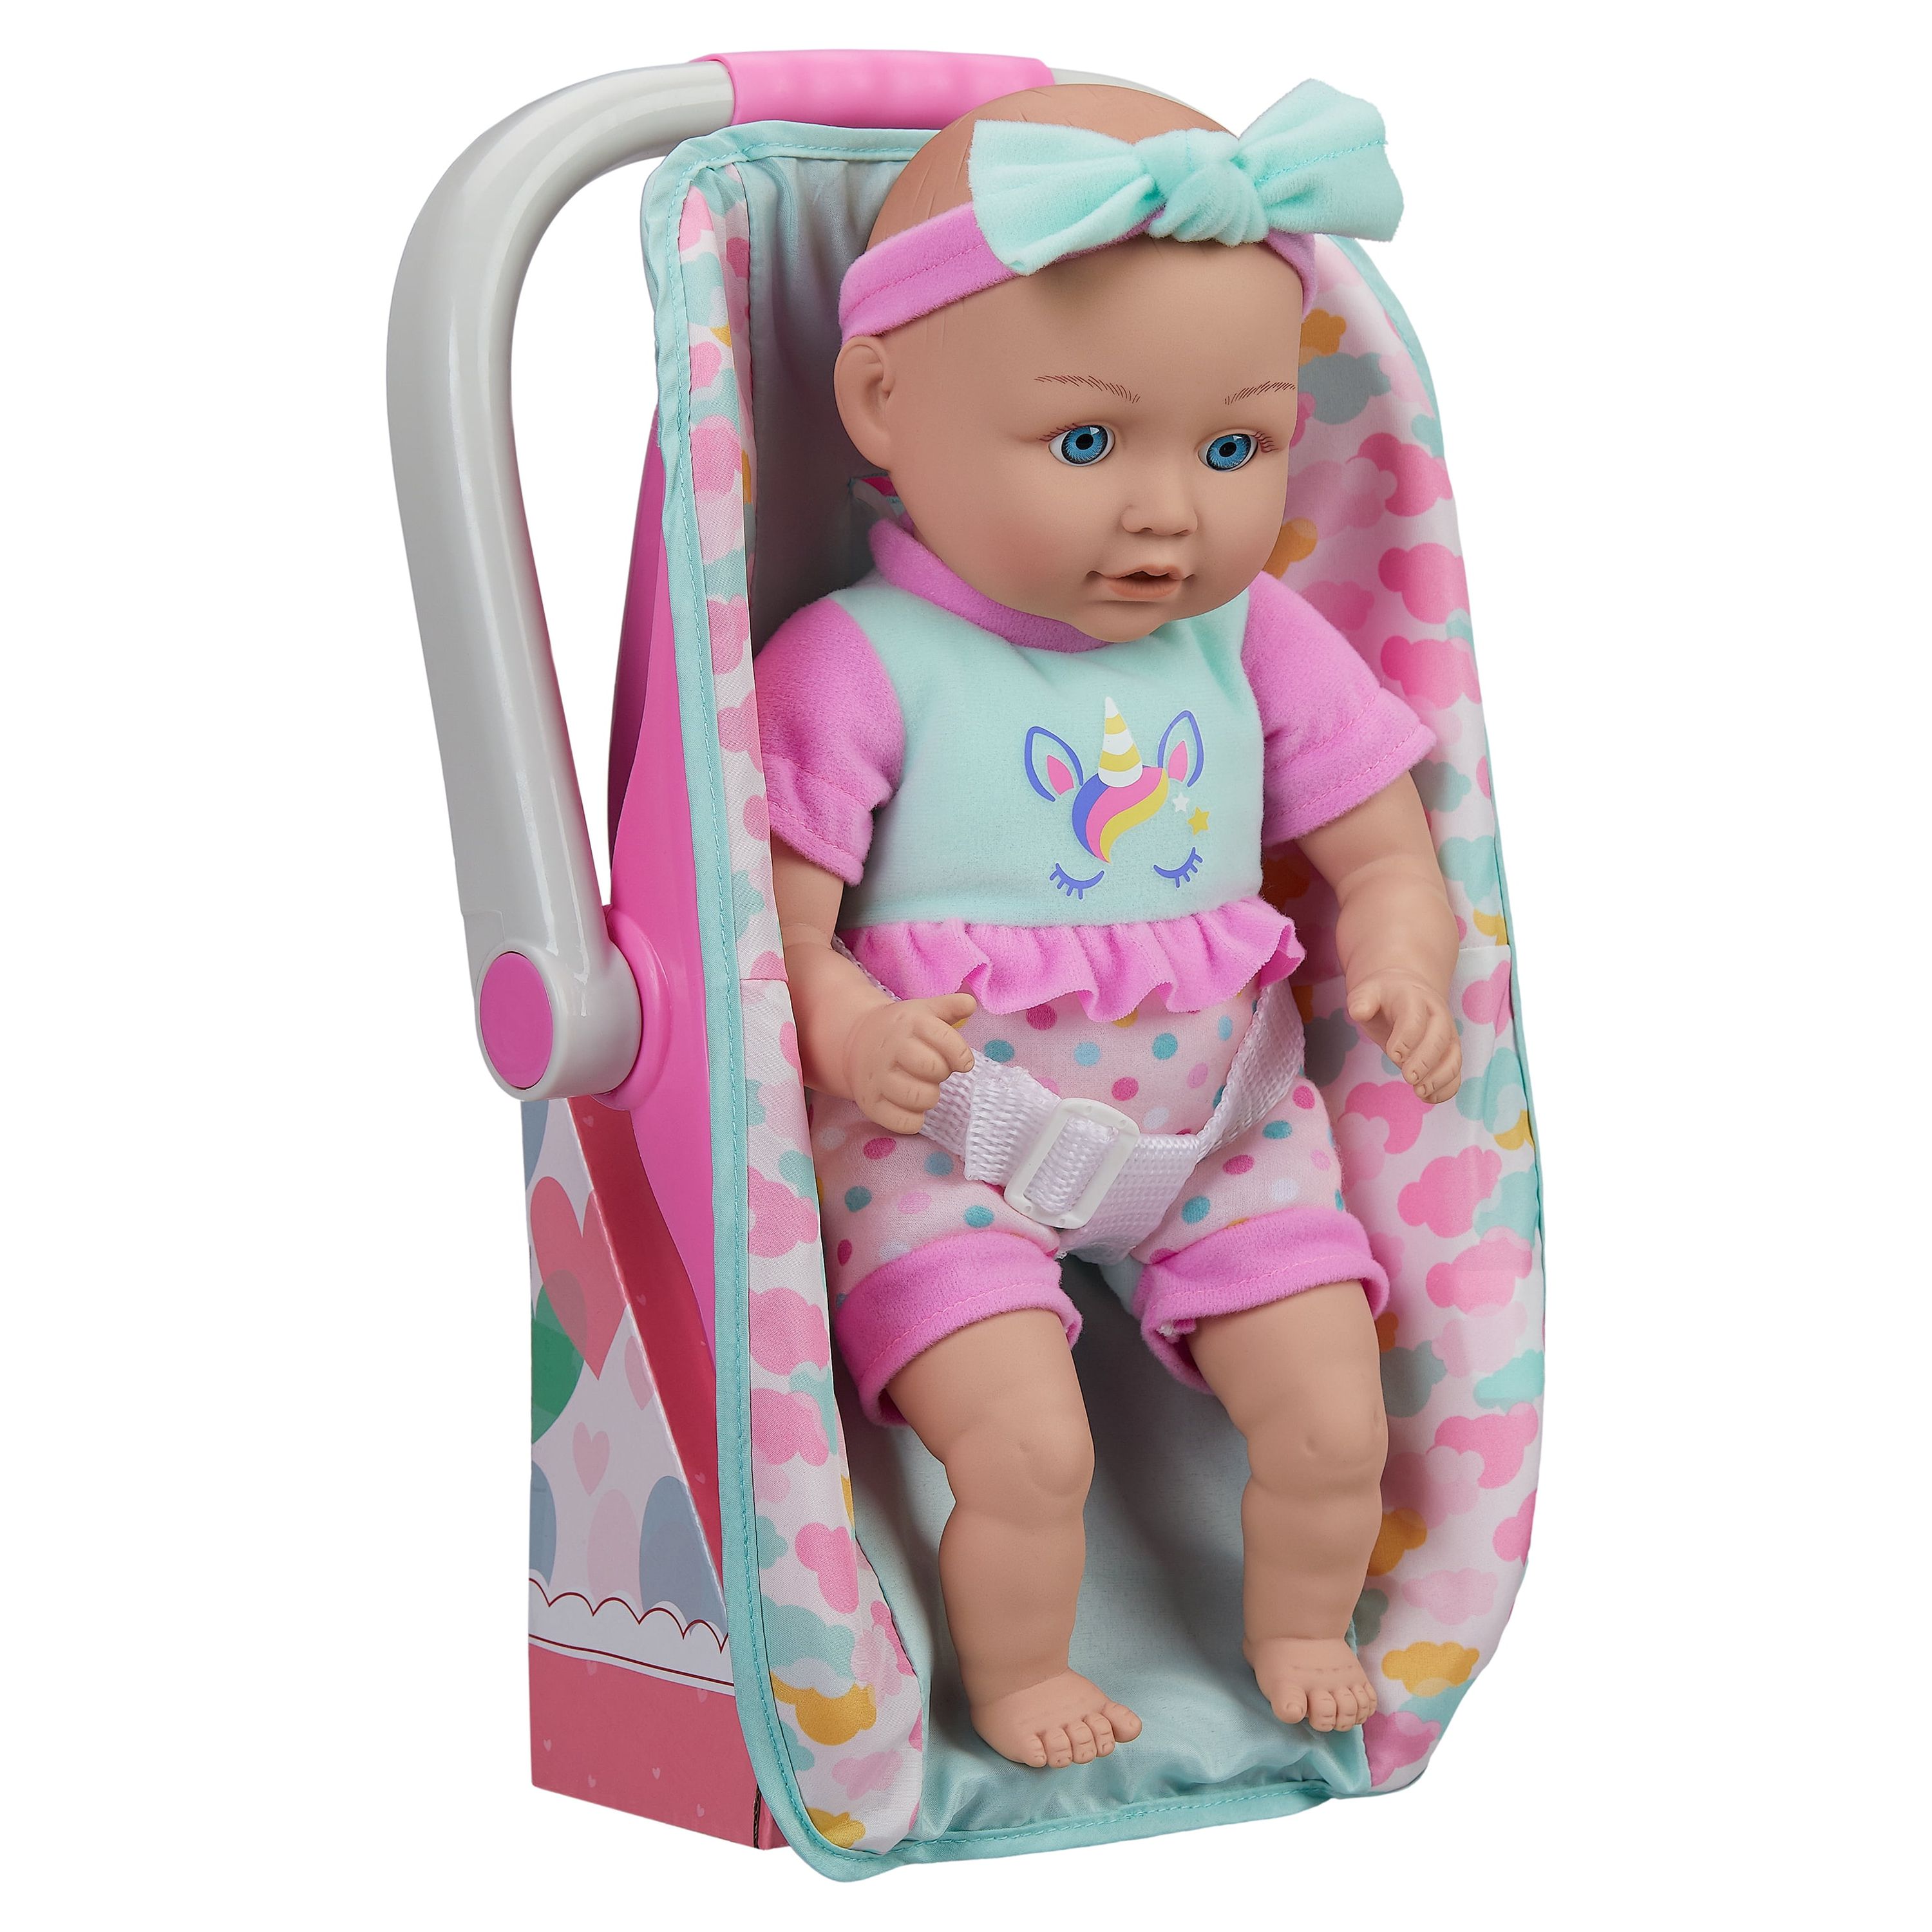 My Sweet Love 13 inch Baby Doll with Carrier and Handle Play Set, Light Skin Tone, Pink Theme - image 4 of 7